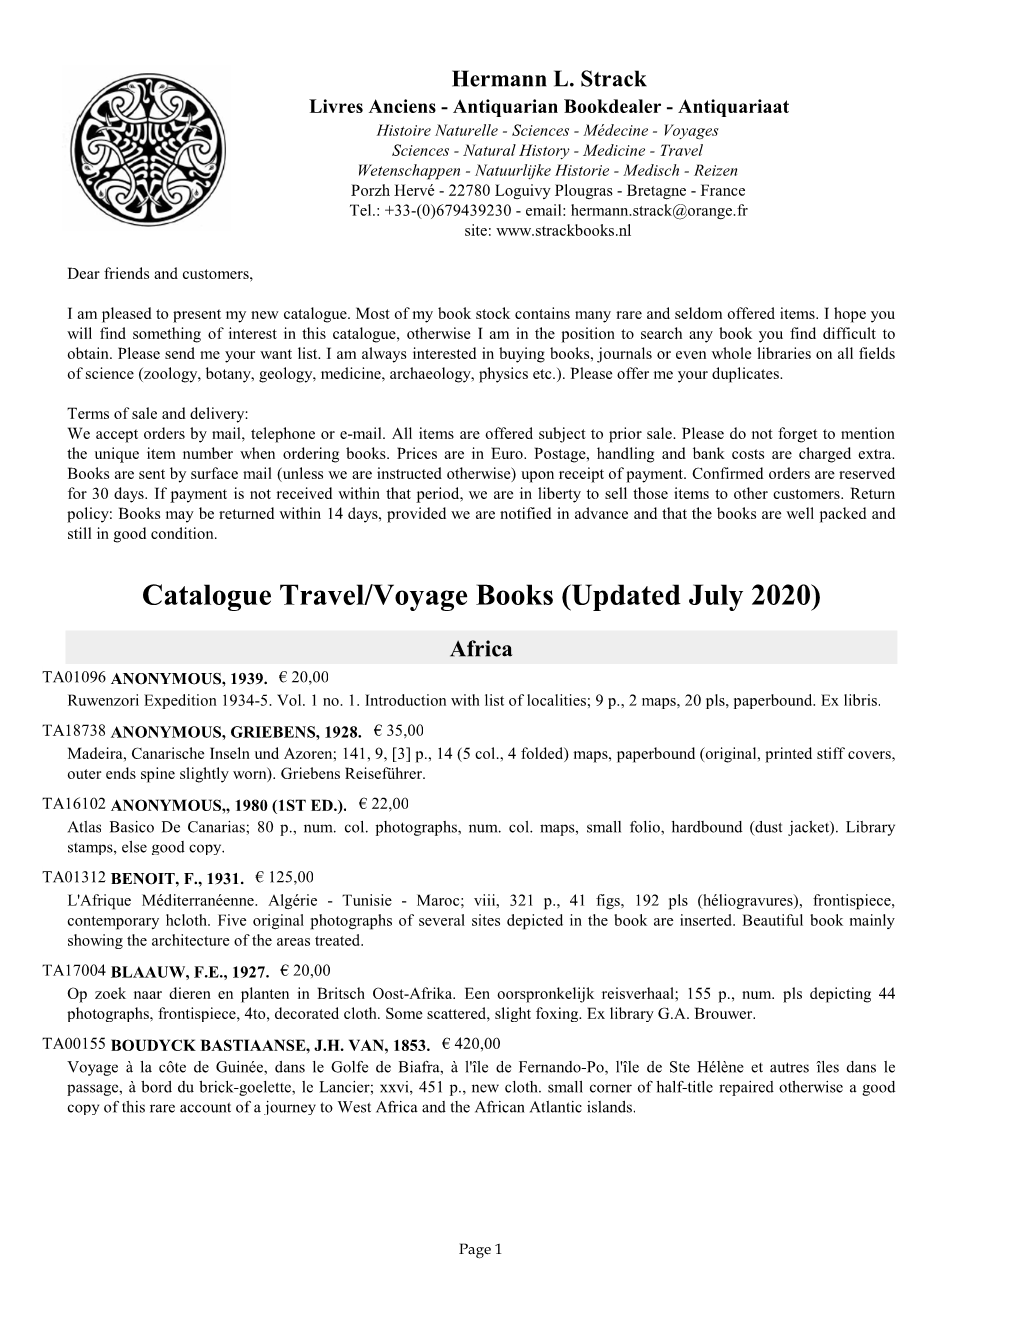 Catalogue Travel/Voyage Books (Updated July 2020)